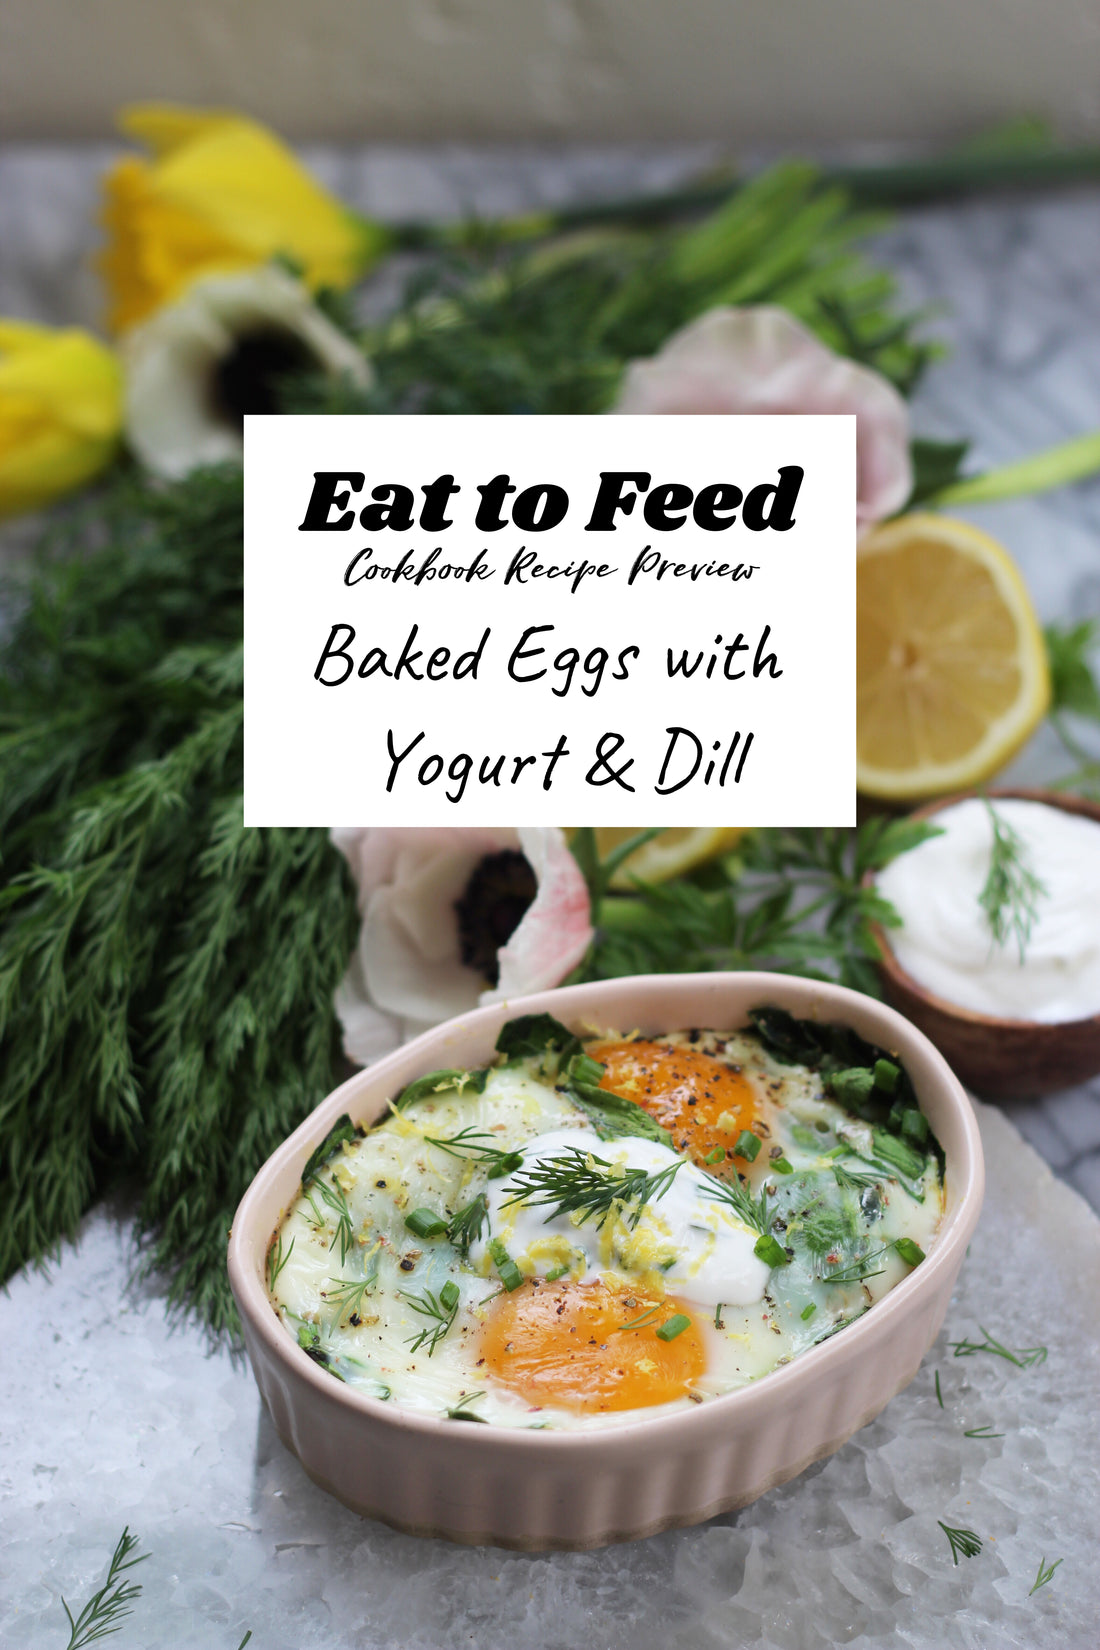 Eat to Feed Cookbook Recipe Preview - Baked Eggs with Yogurt & Dill